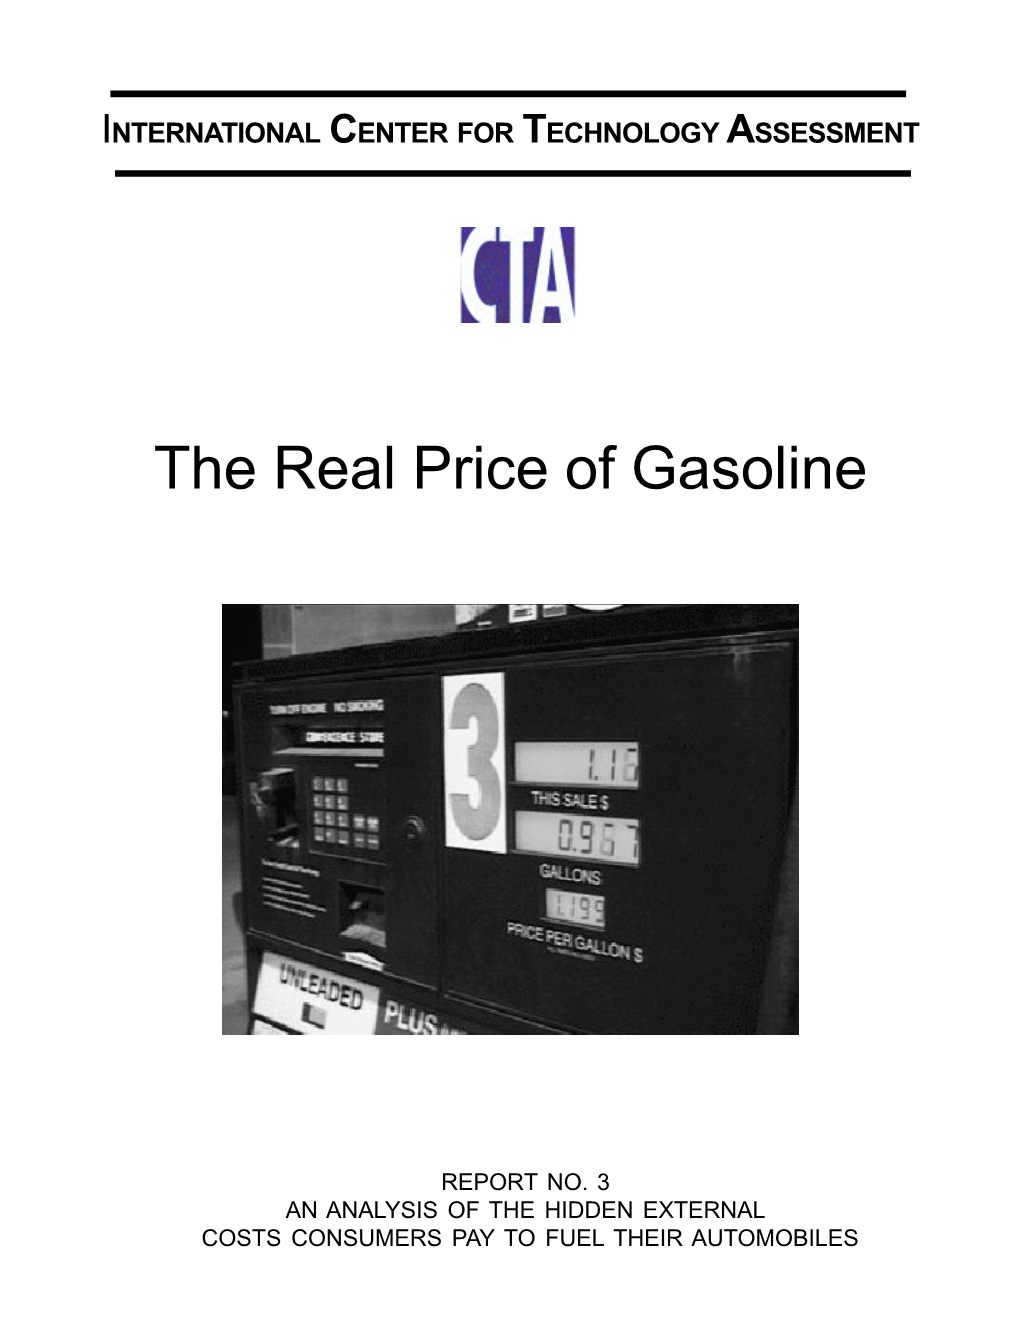 The Real Price of Gasoline